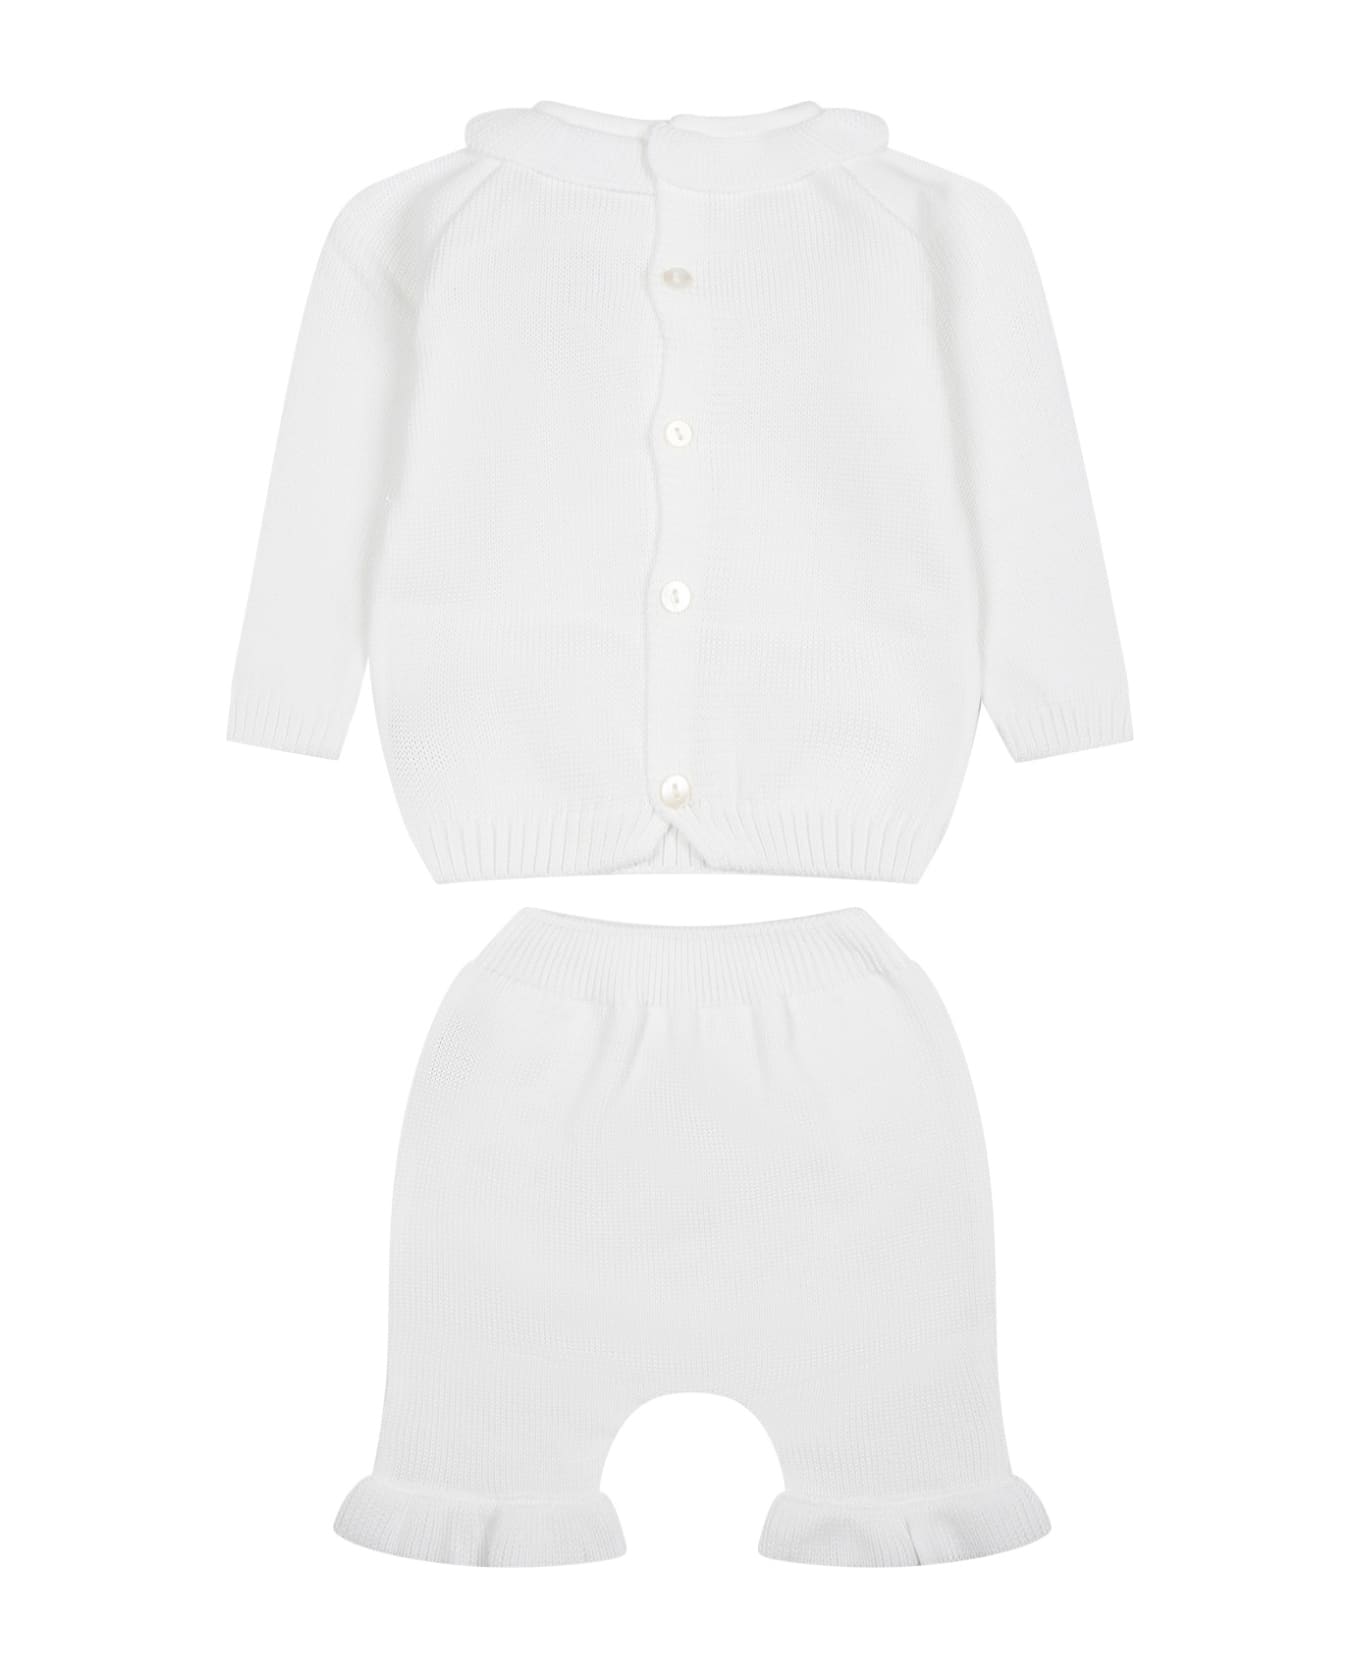 Little Bear White Birth Suit For Baby Girl - Bianco